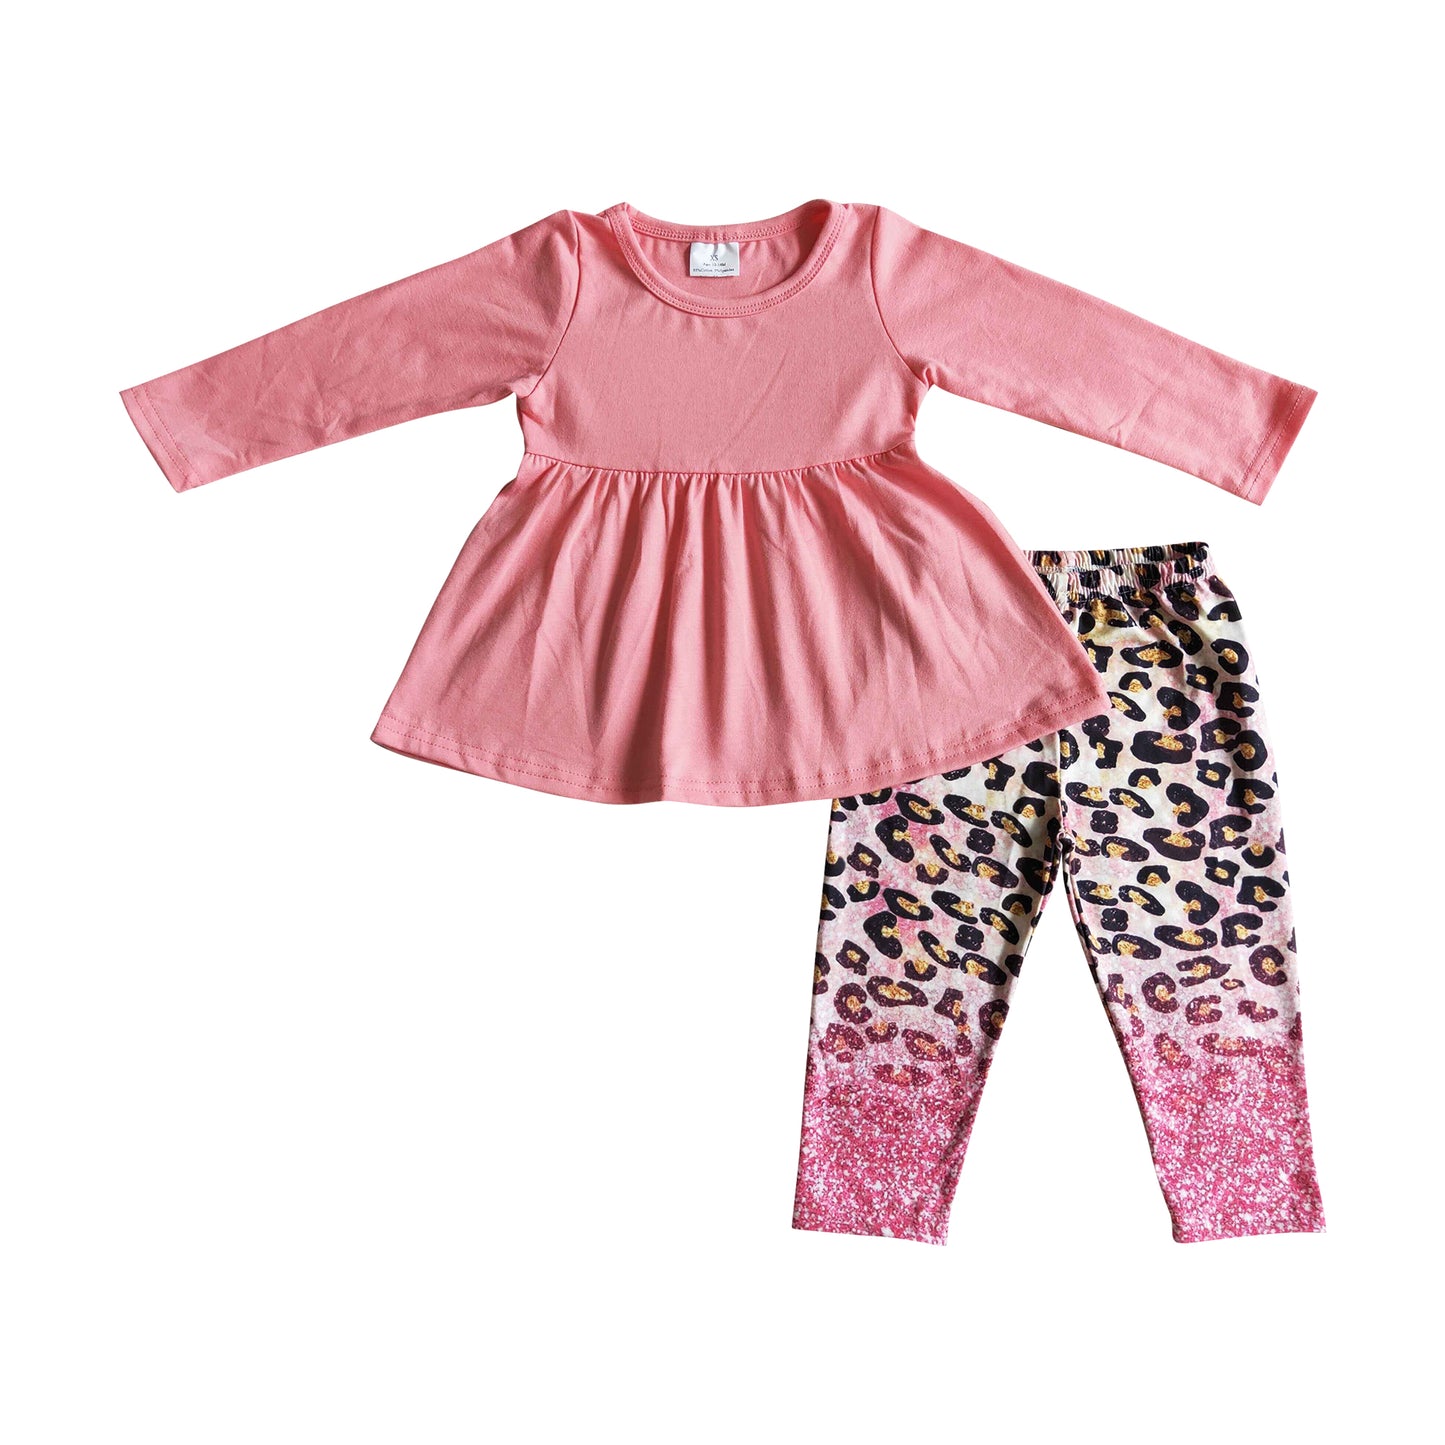 kids clothing pink dress leopard leggings outfit